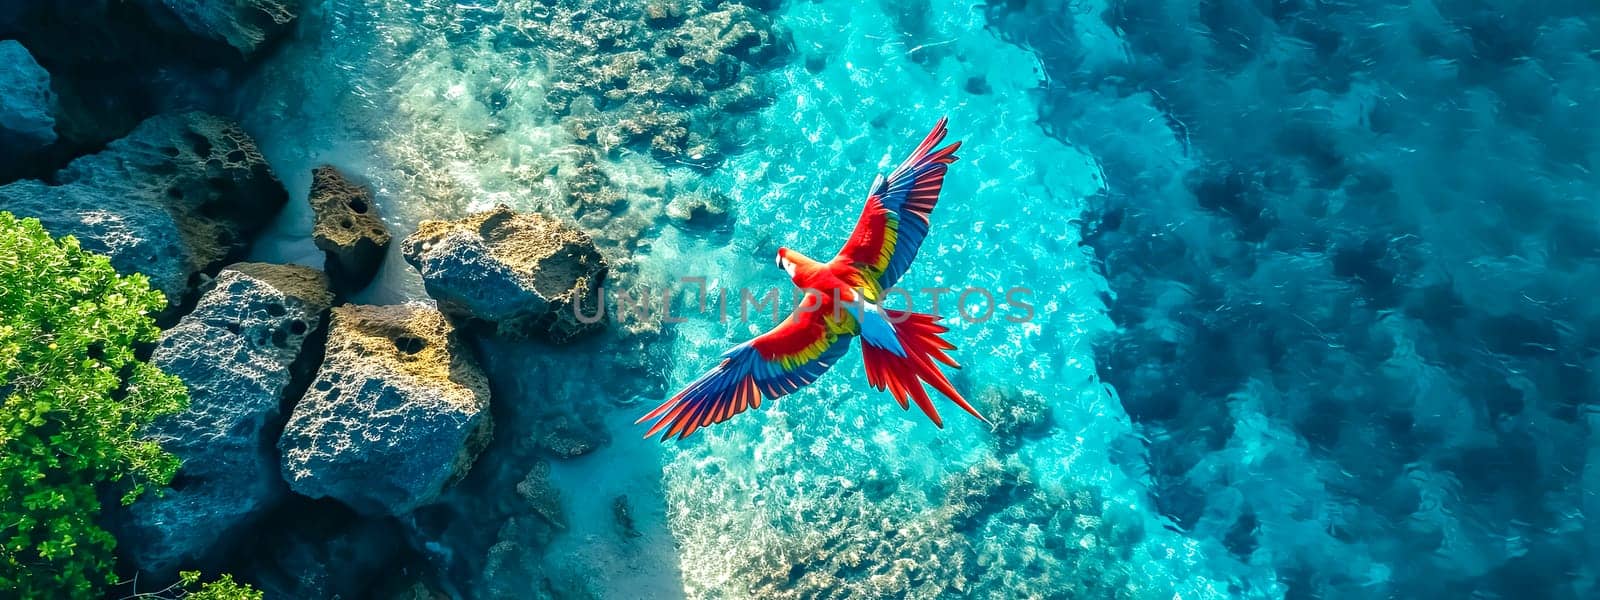 Aerial view of a vividly colored parrot flying over a tropical landscape with crystal clear waters and lush greenery